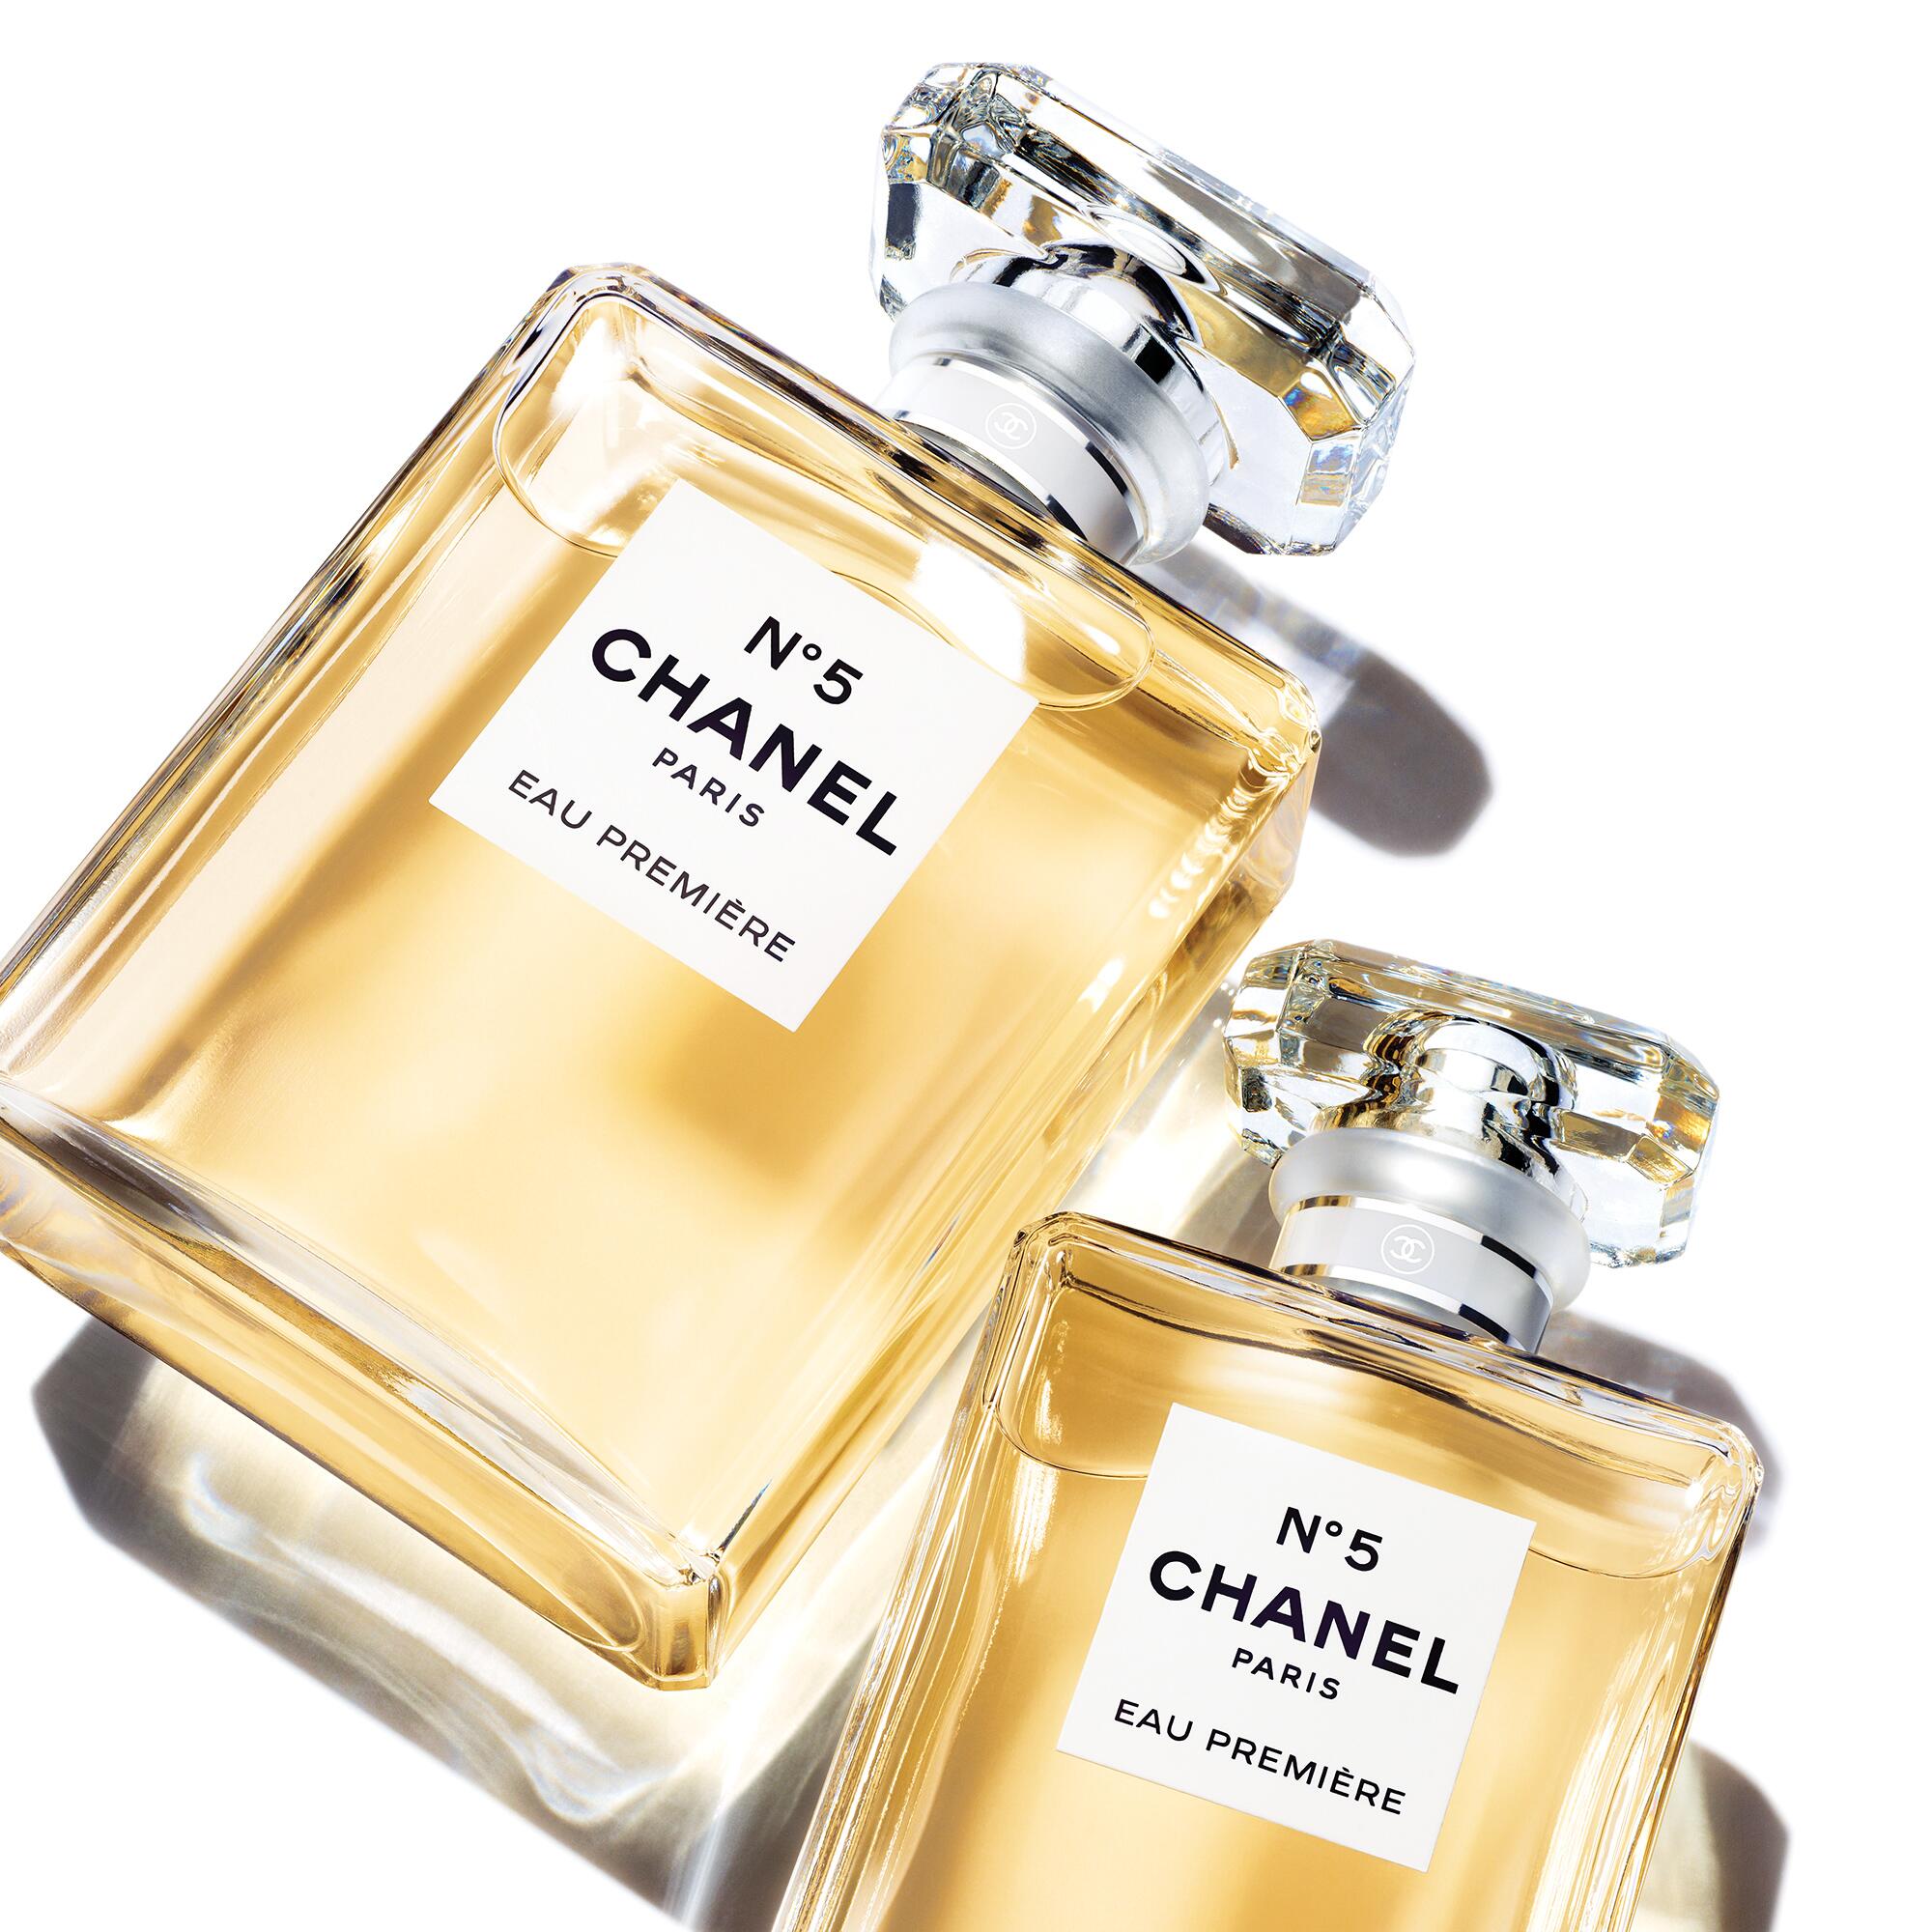 CHANEL on X: N°5 EAU PREMIÈRE. A new way to experience the legend